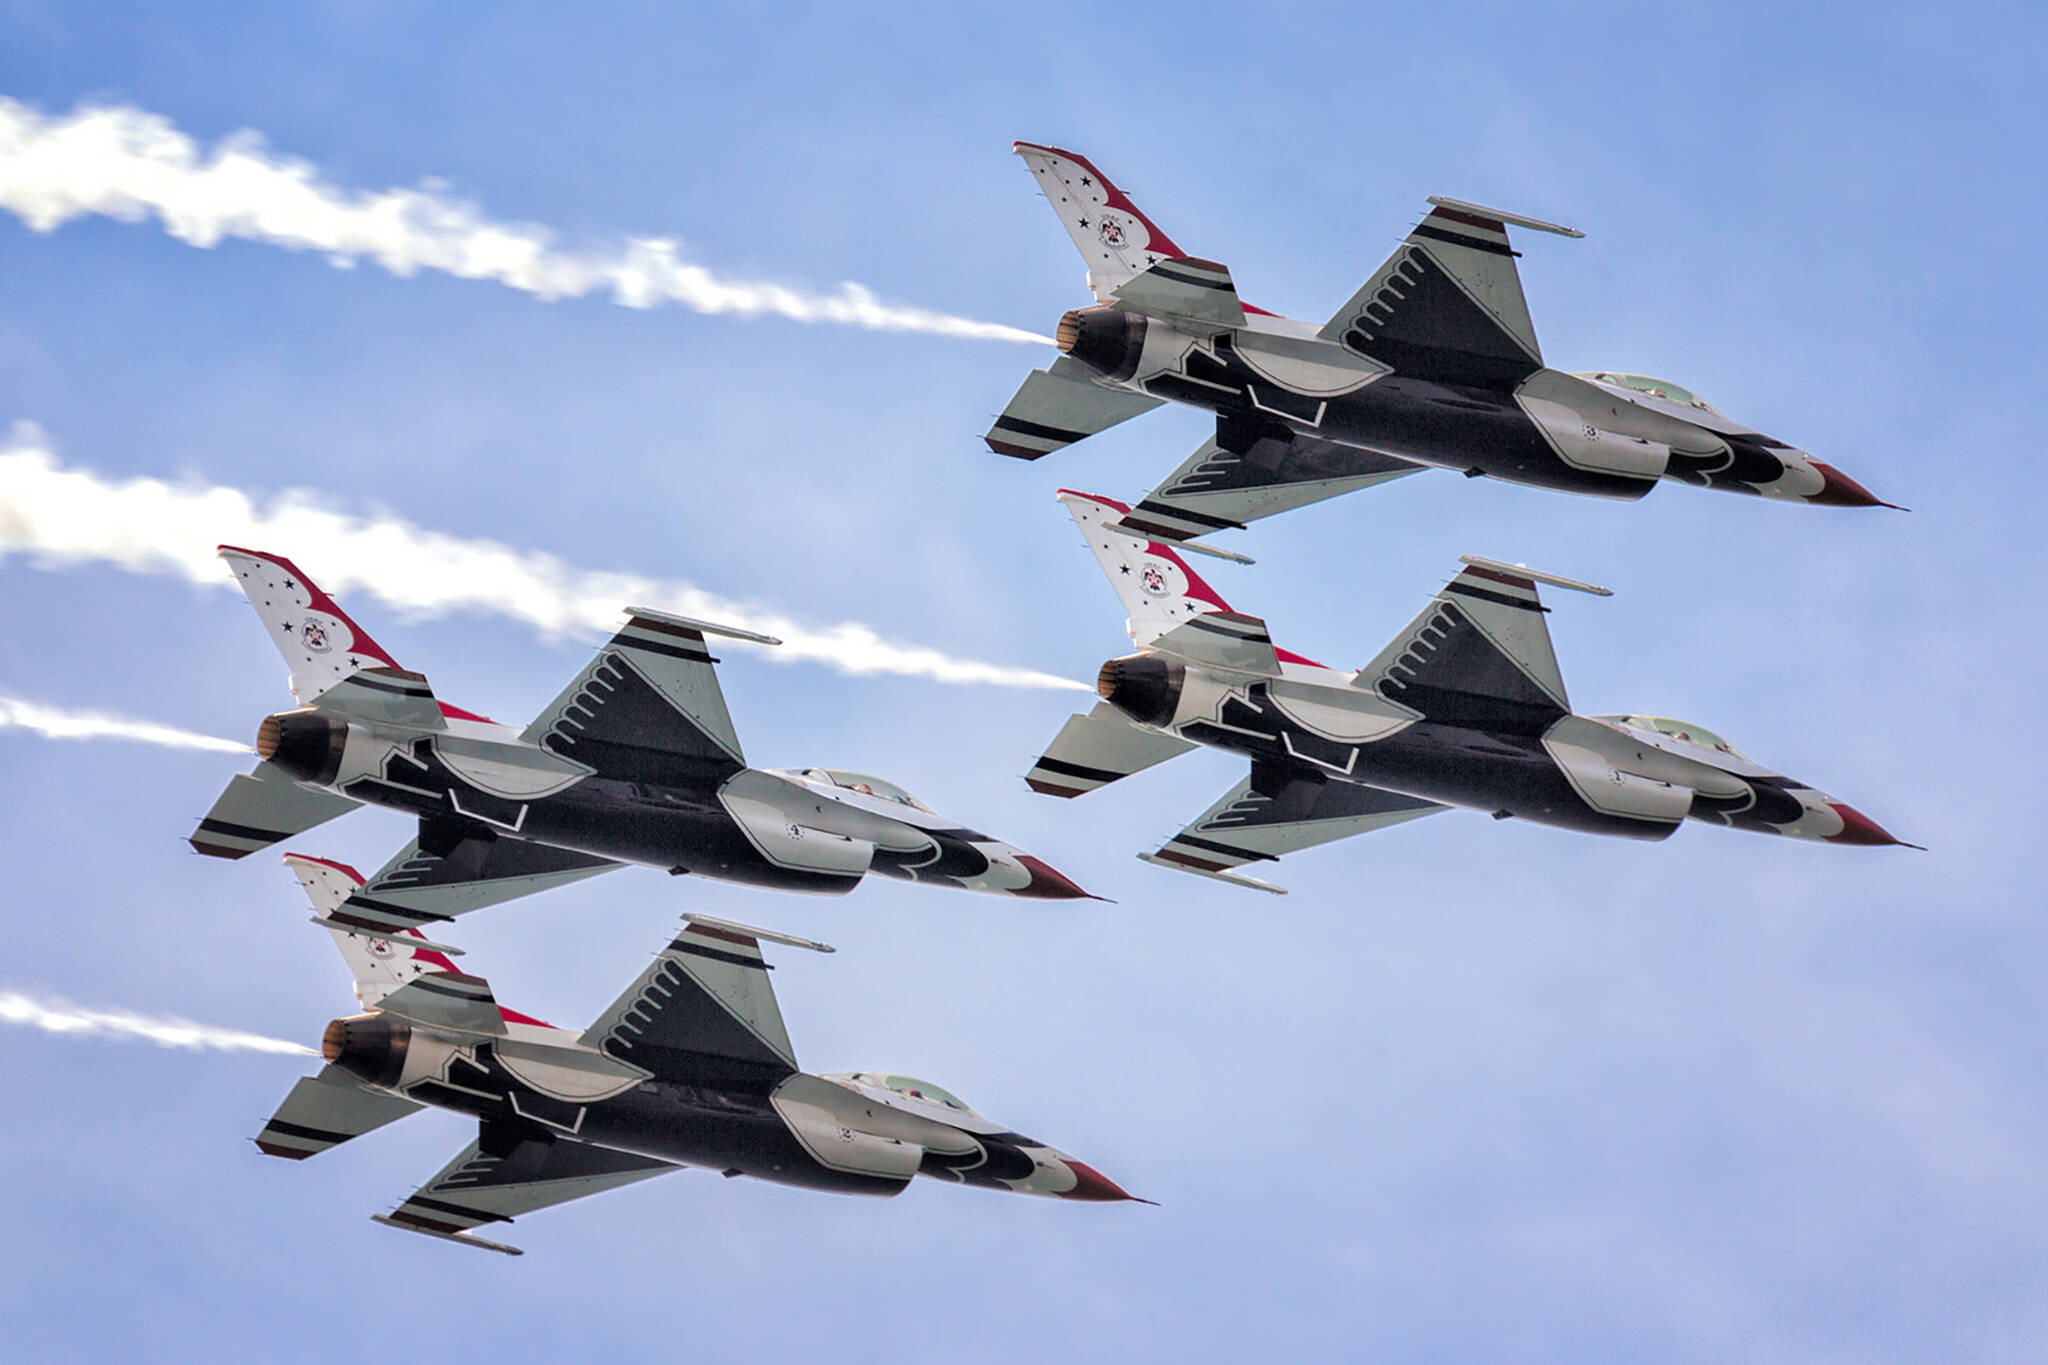 Fighter jets are flying over Toronto today and it's really freaking loud